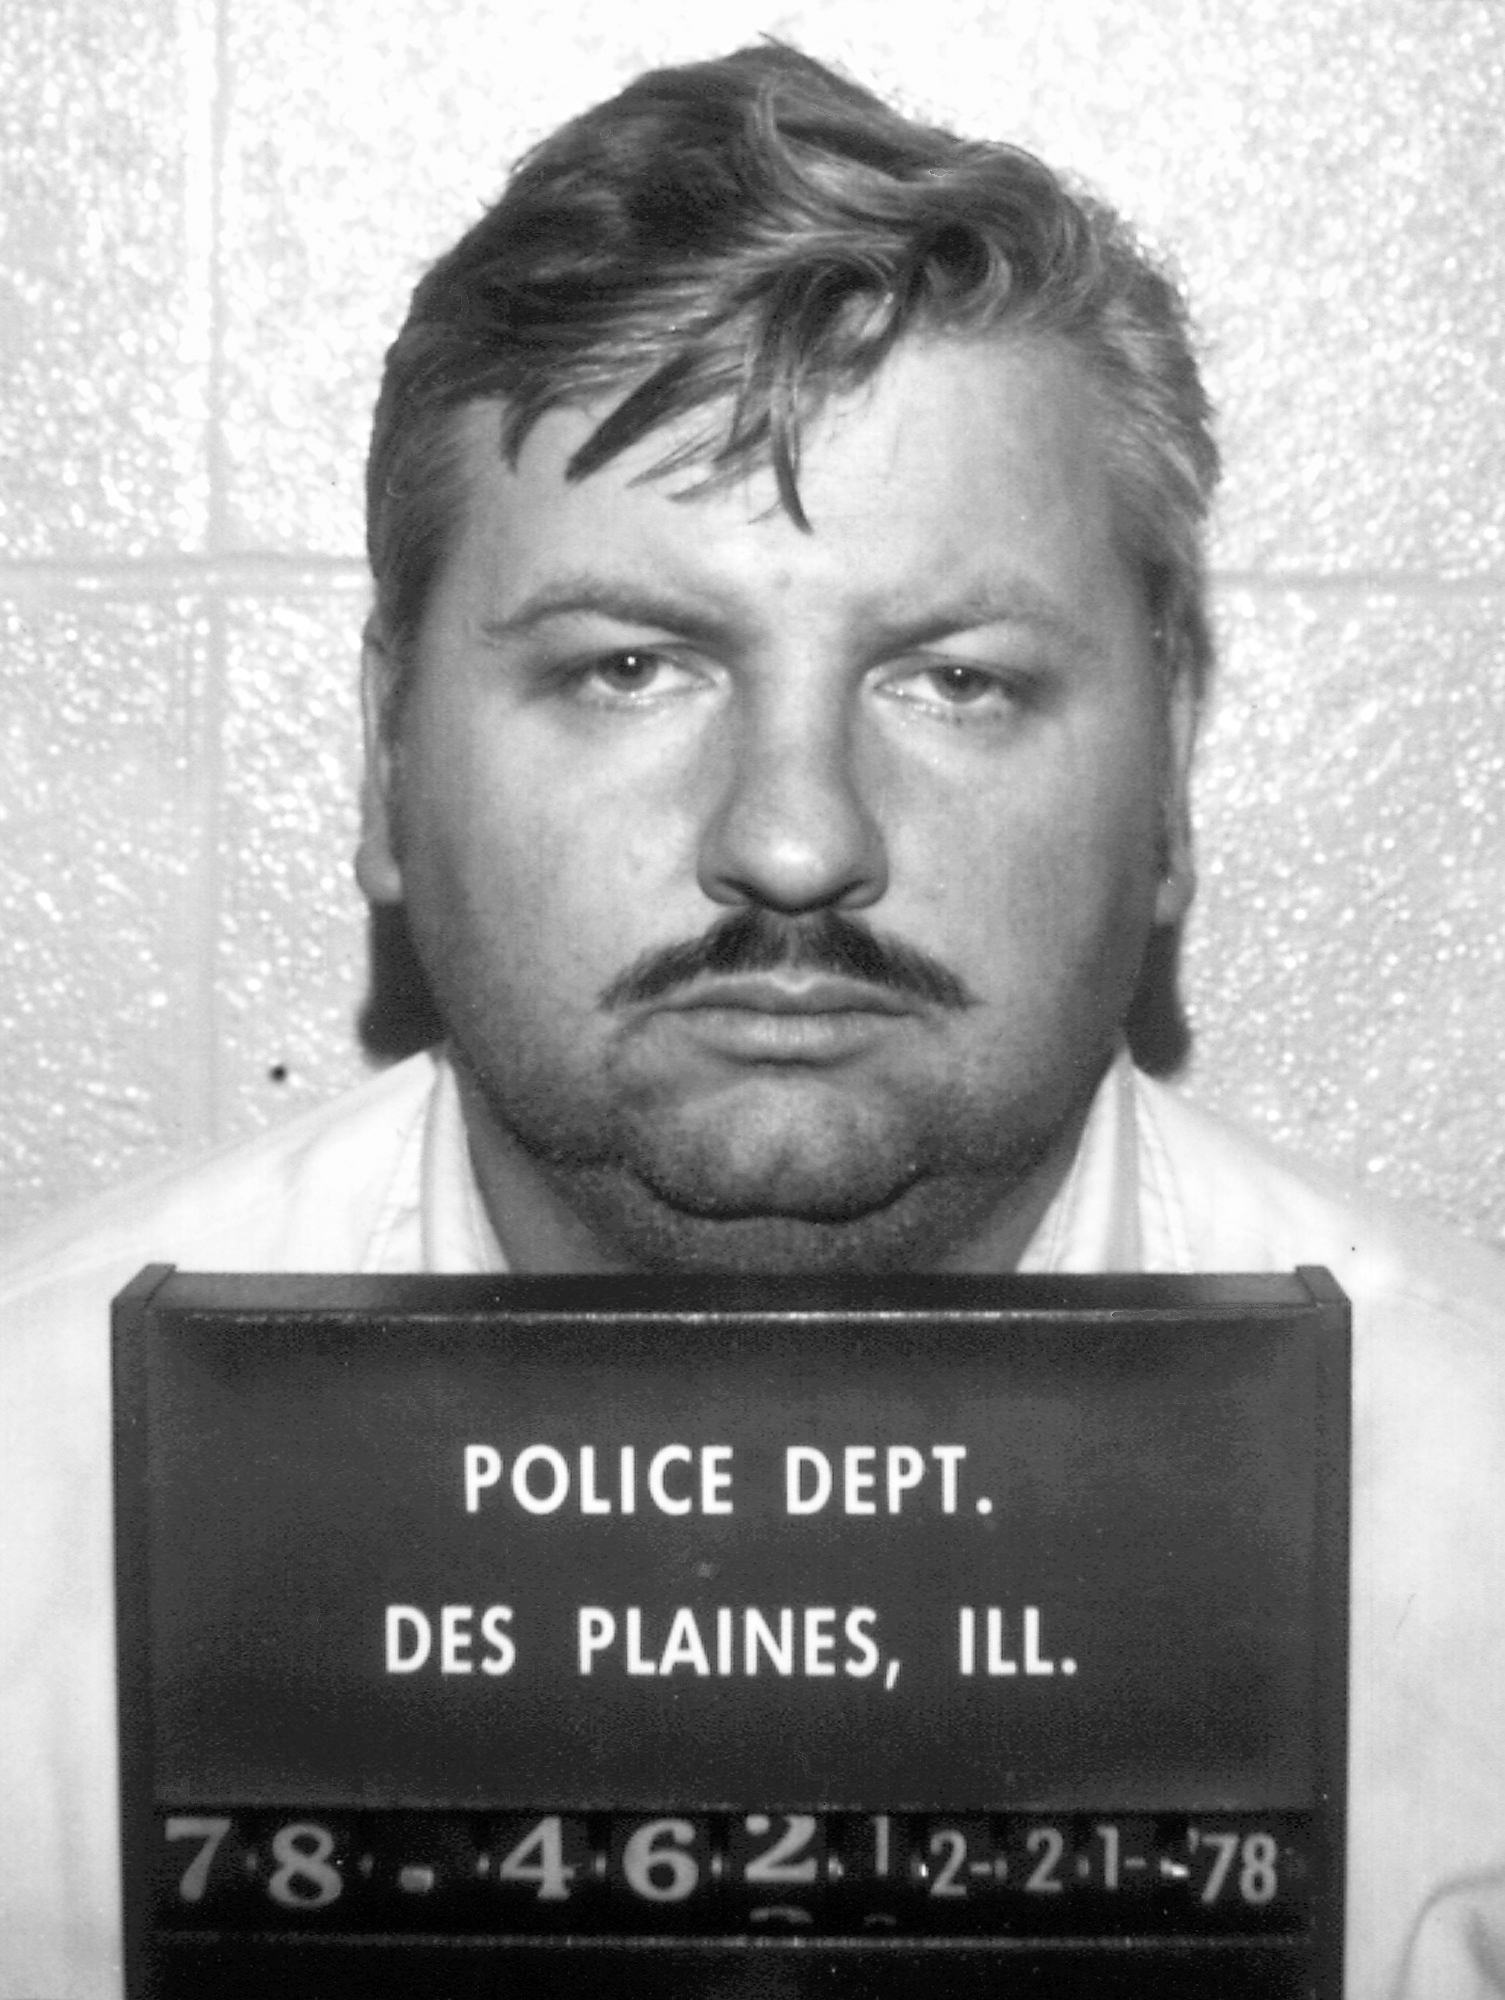 Michael Gacy Wikipedia, Story, Age, Now, Victims